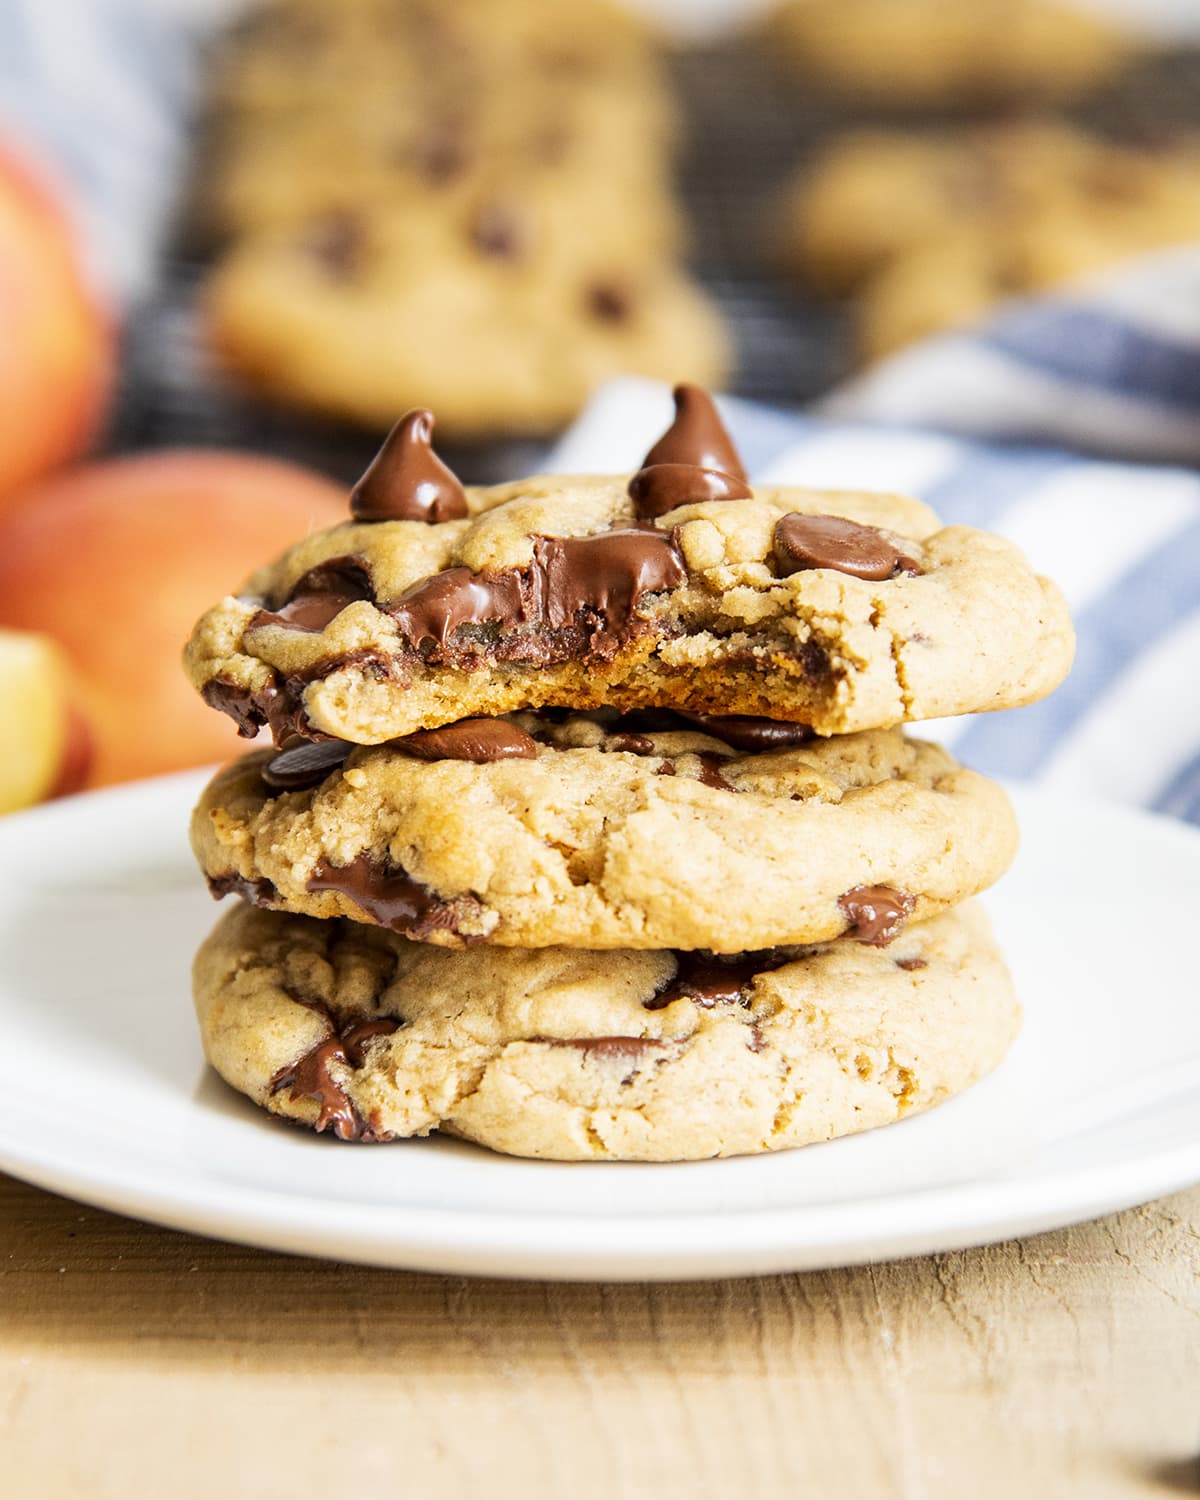 A stack of three applesauce cookies with chocolate chips. The top cookie has a bite out of it.